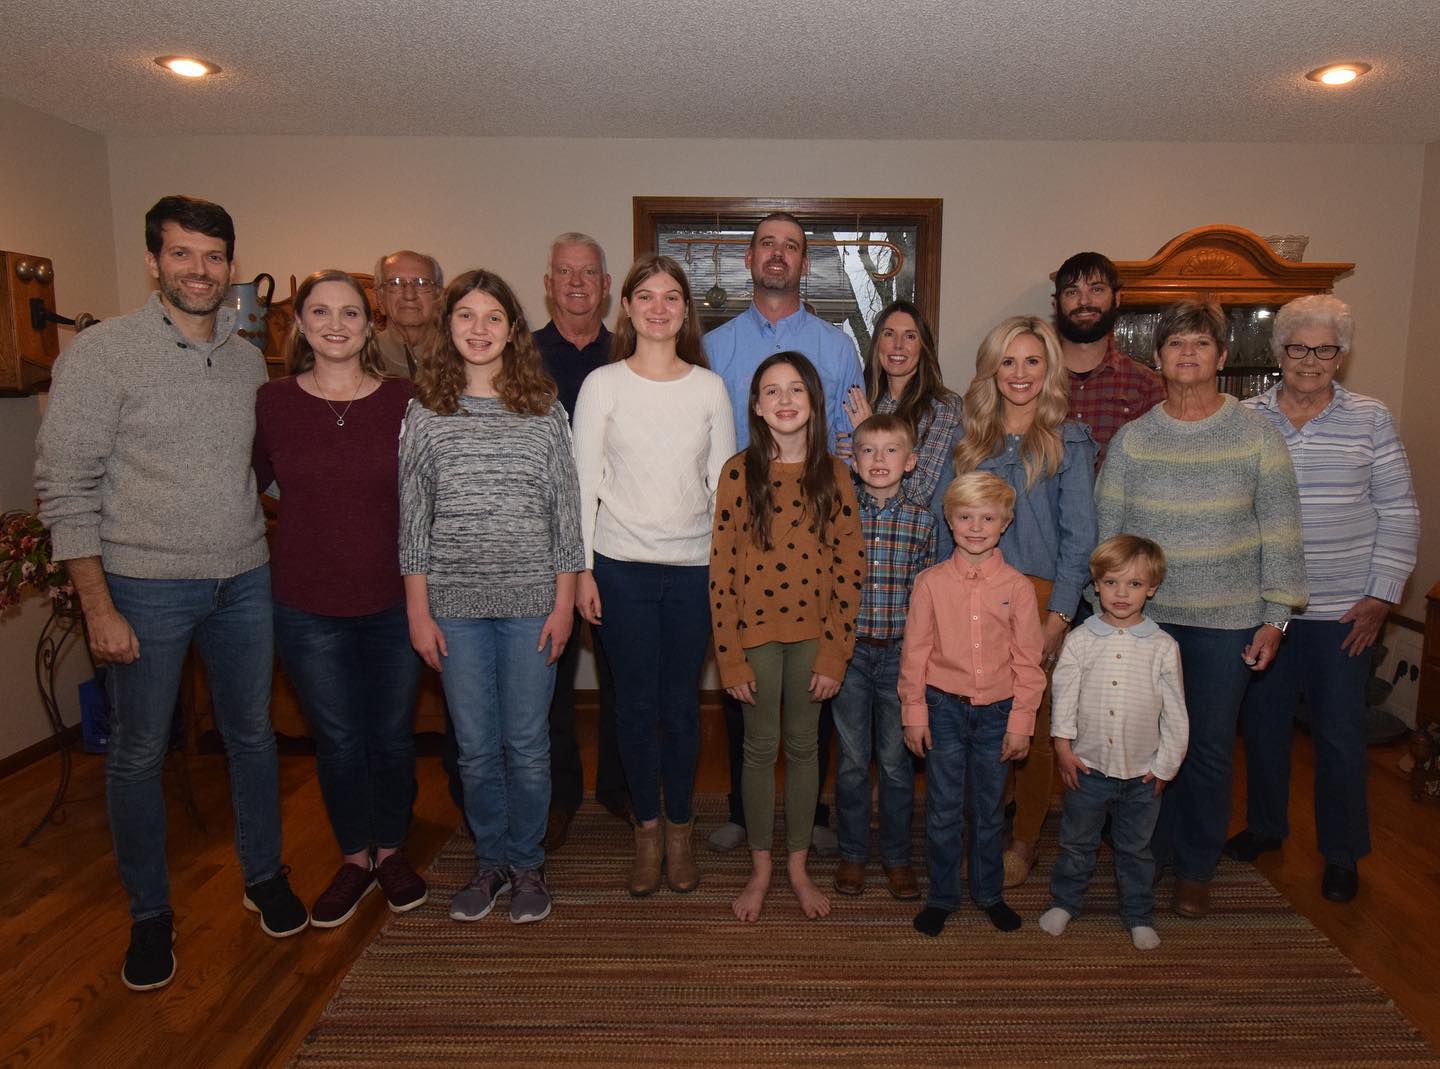 After missing last year, it was so good to have the whole family back together again. It did my heart good to see all the kids playing together. Happy Thanksgiving everybody!!